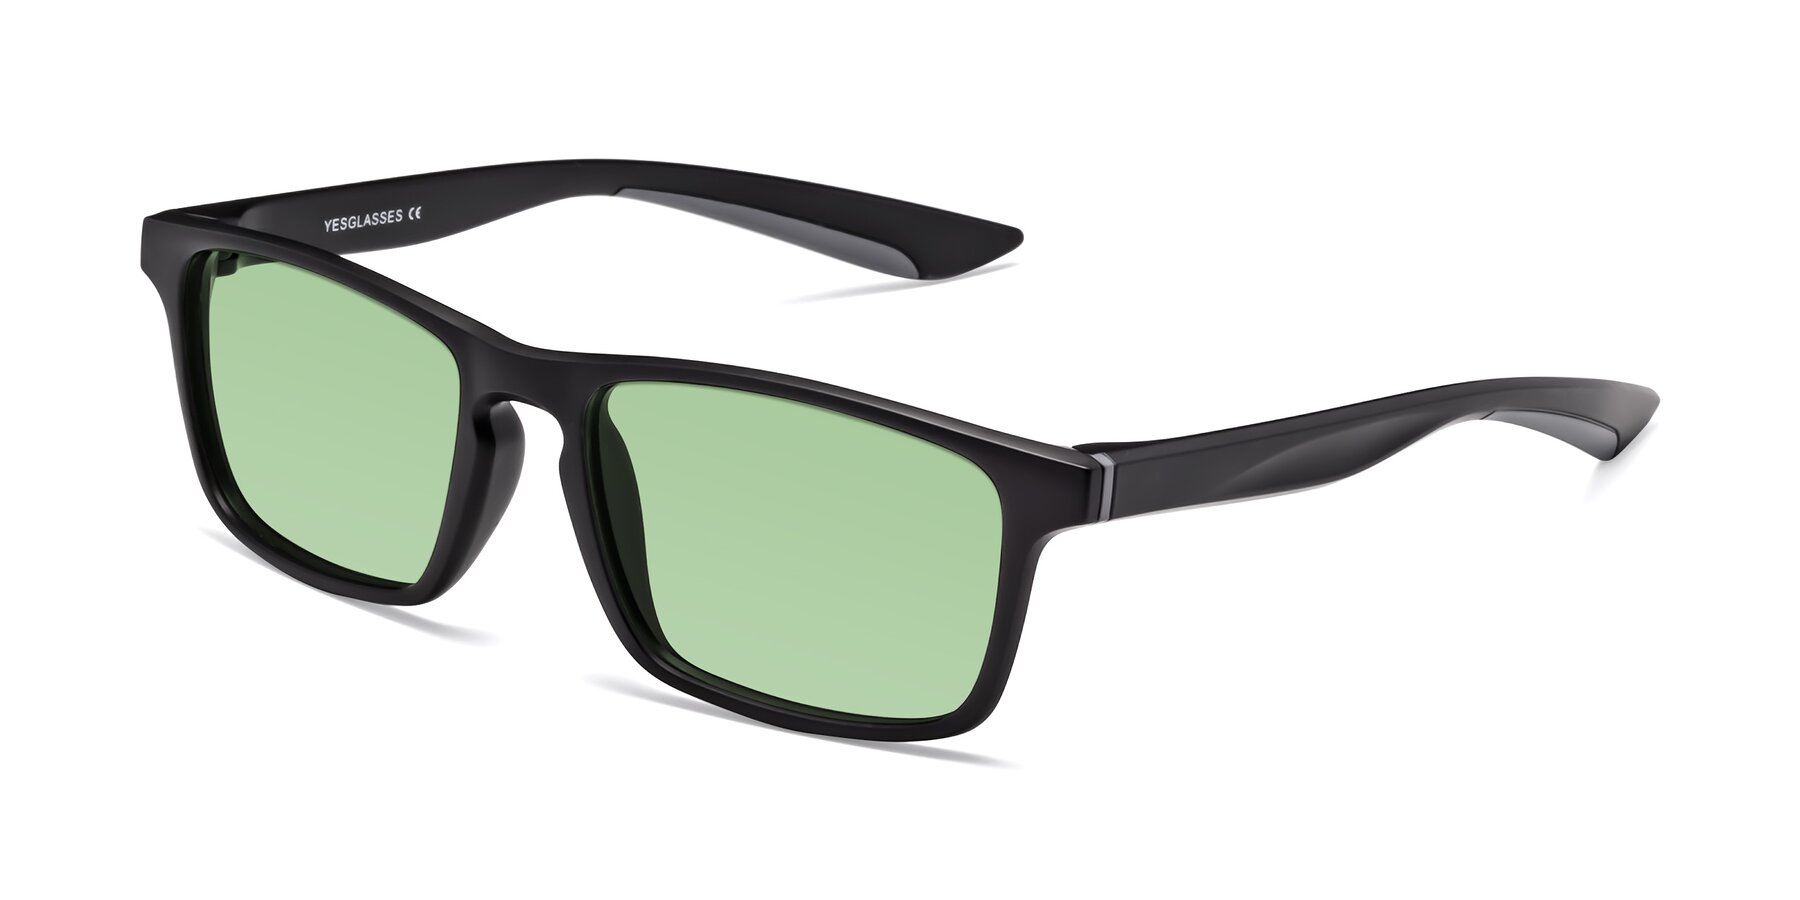 Angle of Passion in Matte Black-Gray with Medium Green Tinted Lenses